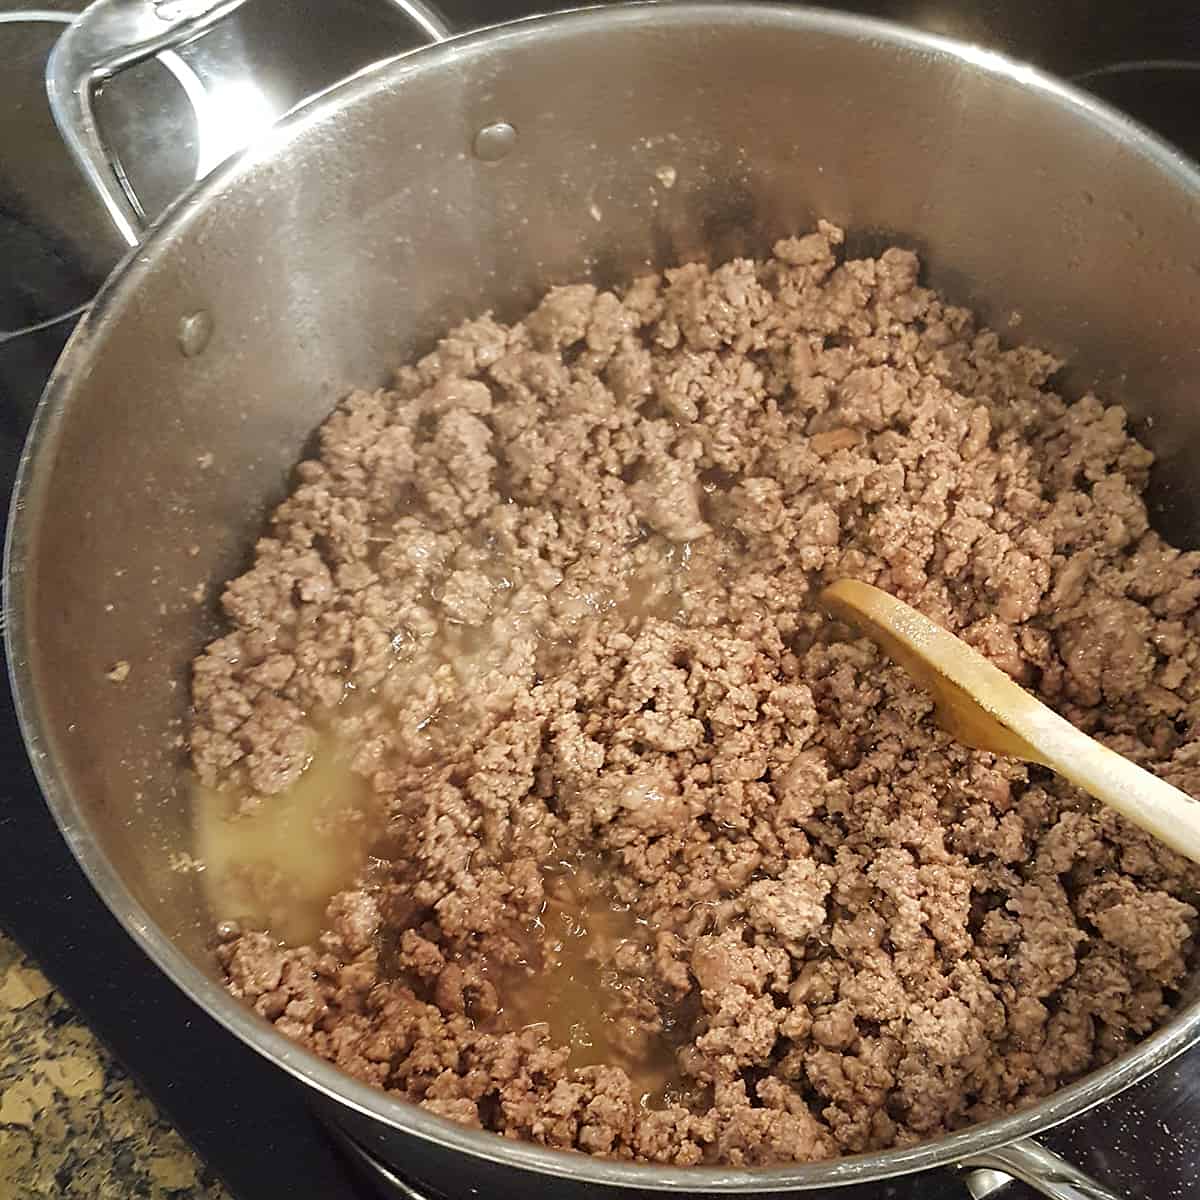 Pan with browned ground beef and a wooden spoon.